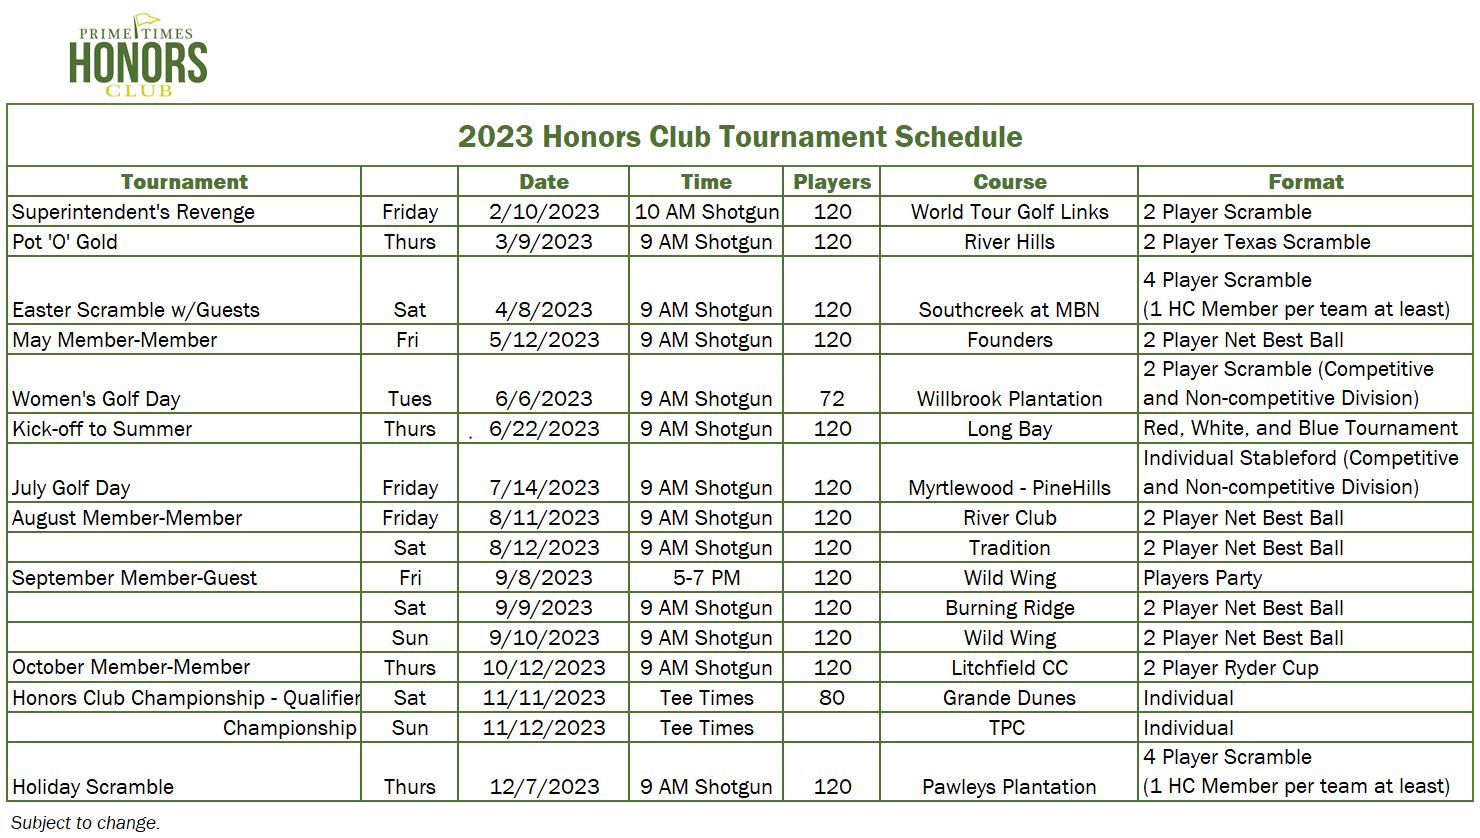 Image: 2023 Honors Club Tournament Schedule